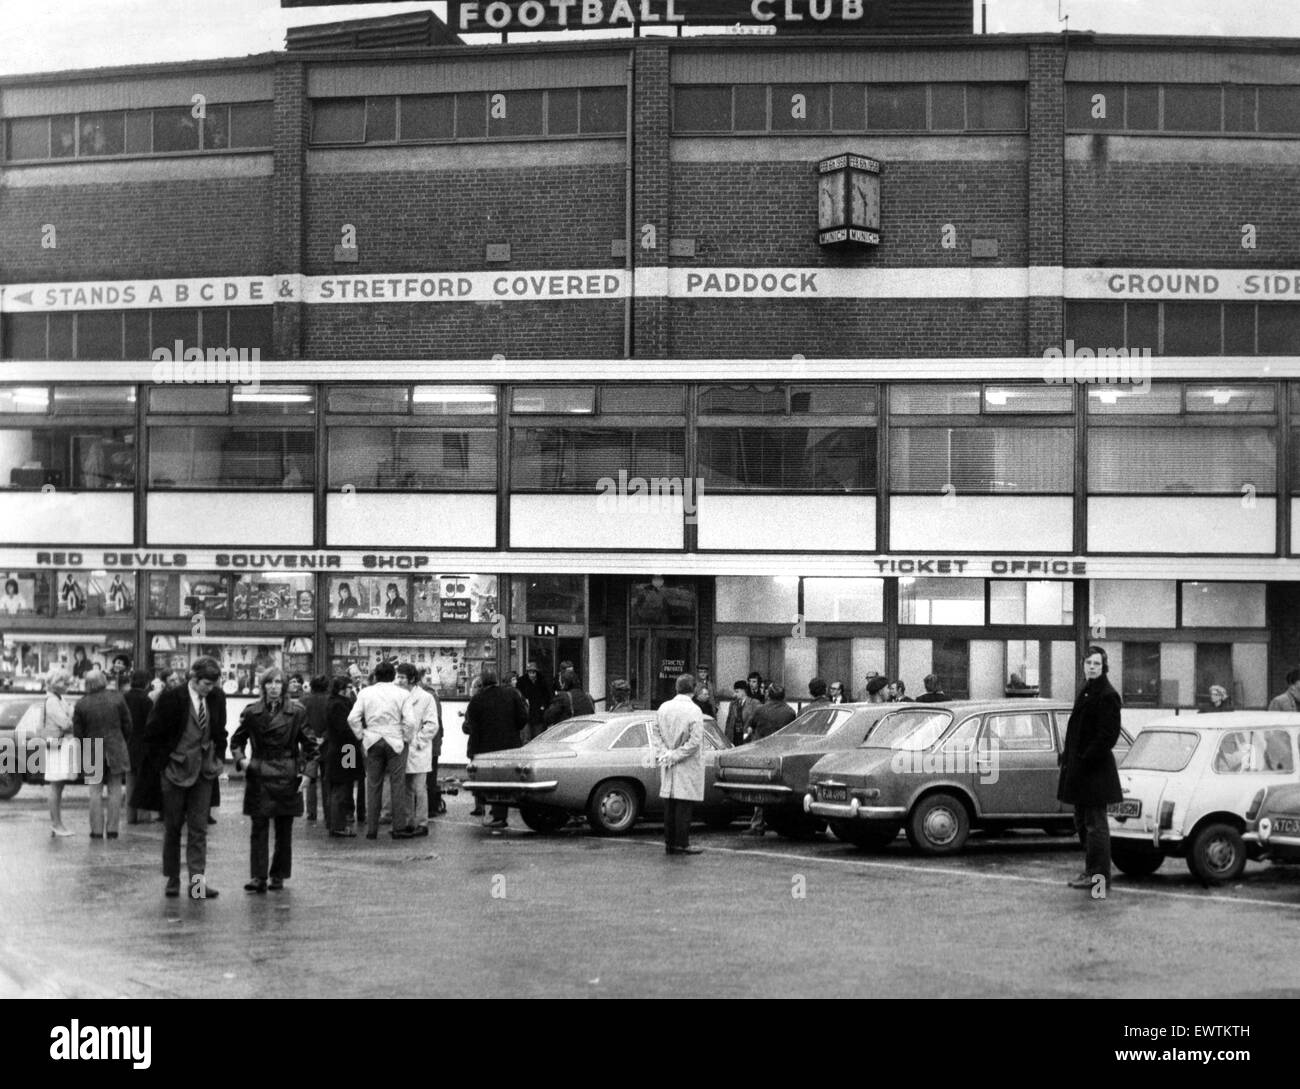 Exterior of Old Trafford football stadium, home to Manchester United Football Club. 10th January 1972. Stock Photo